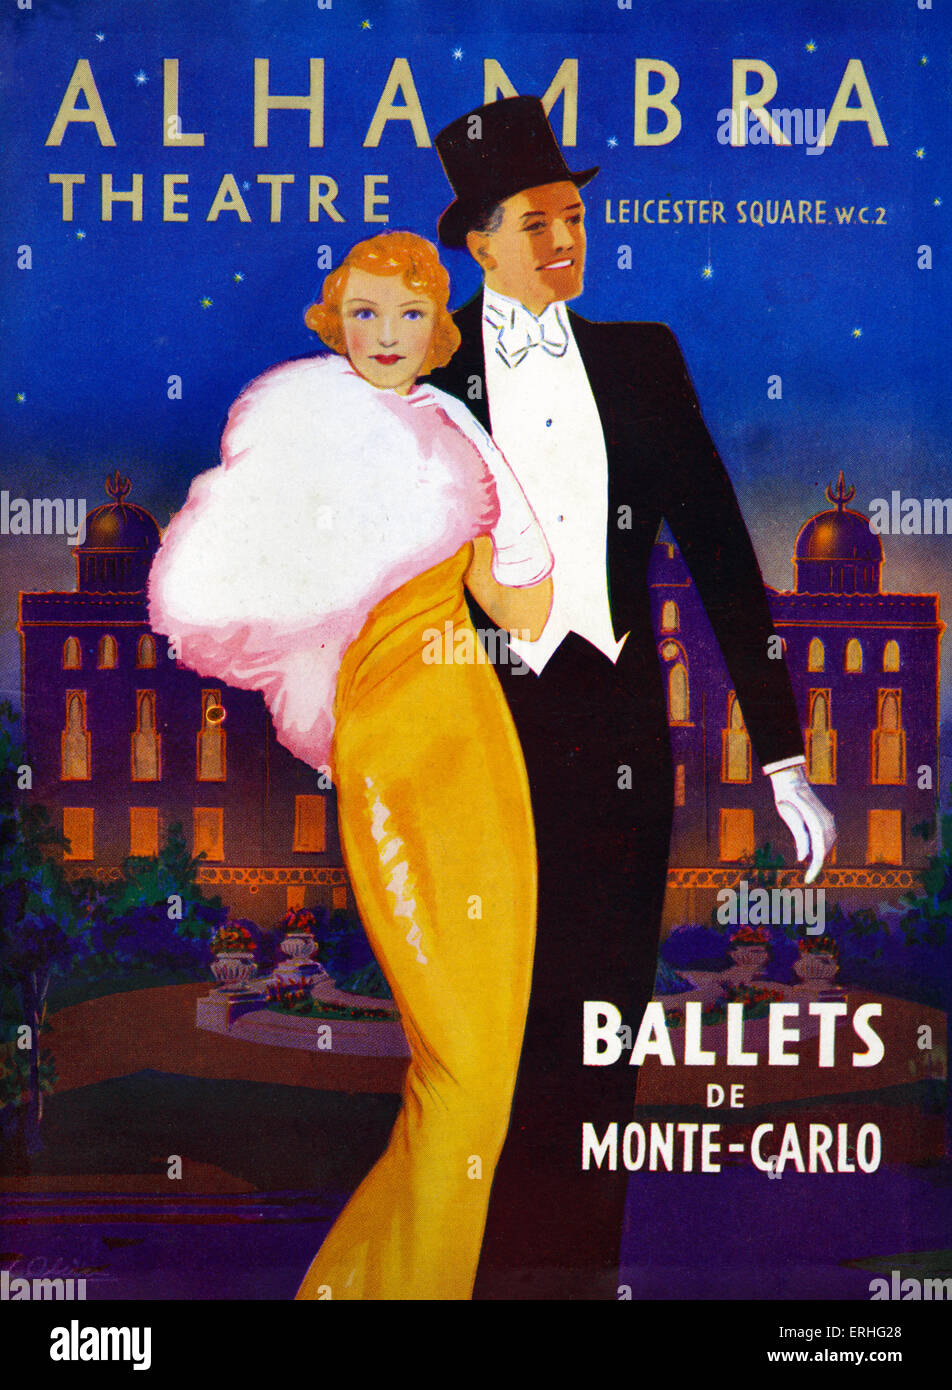 1930s couple in evening dress going out on the town - On cover of Programme for ballets de Monte Carlo at Alhambra Theatre, Stock Photo